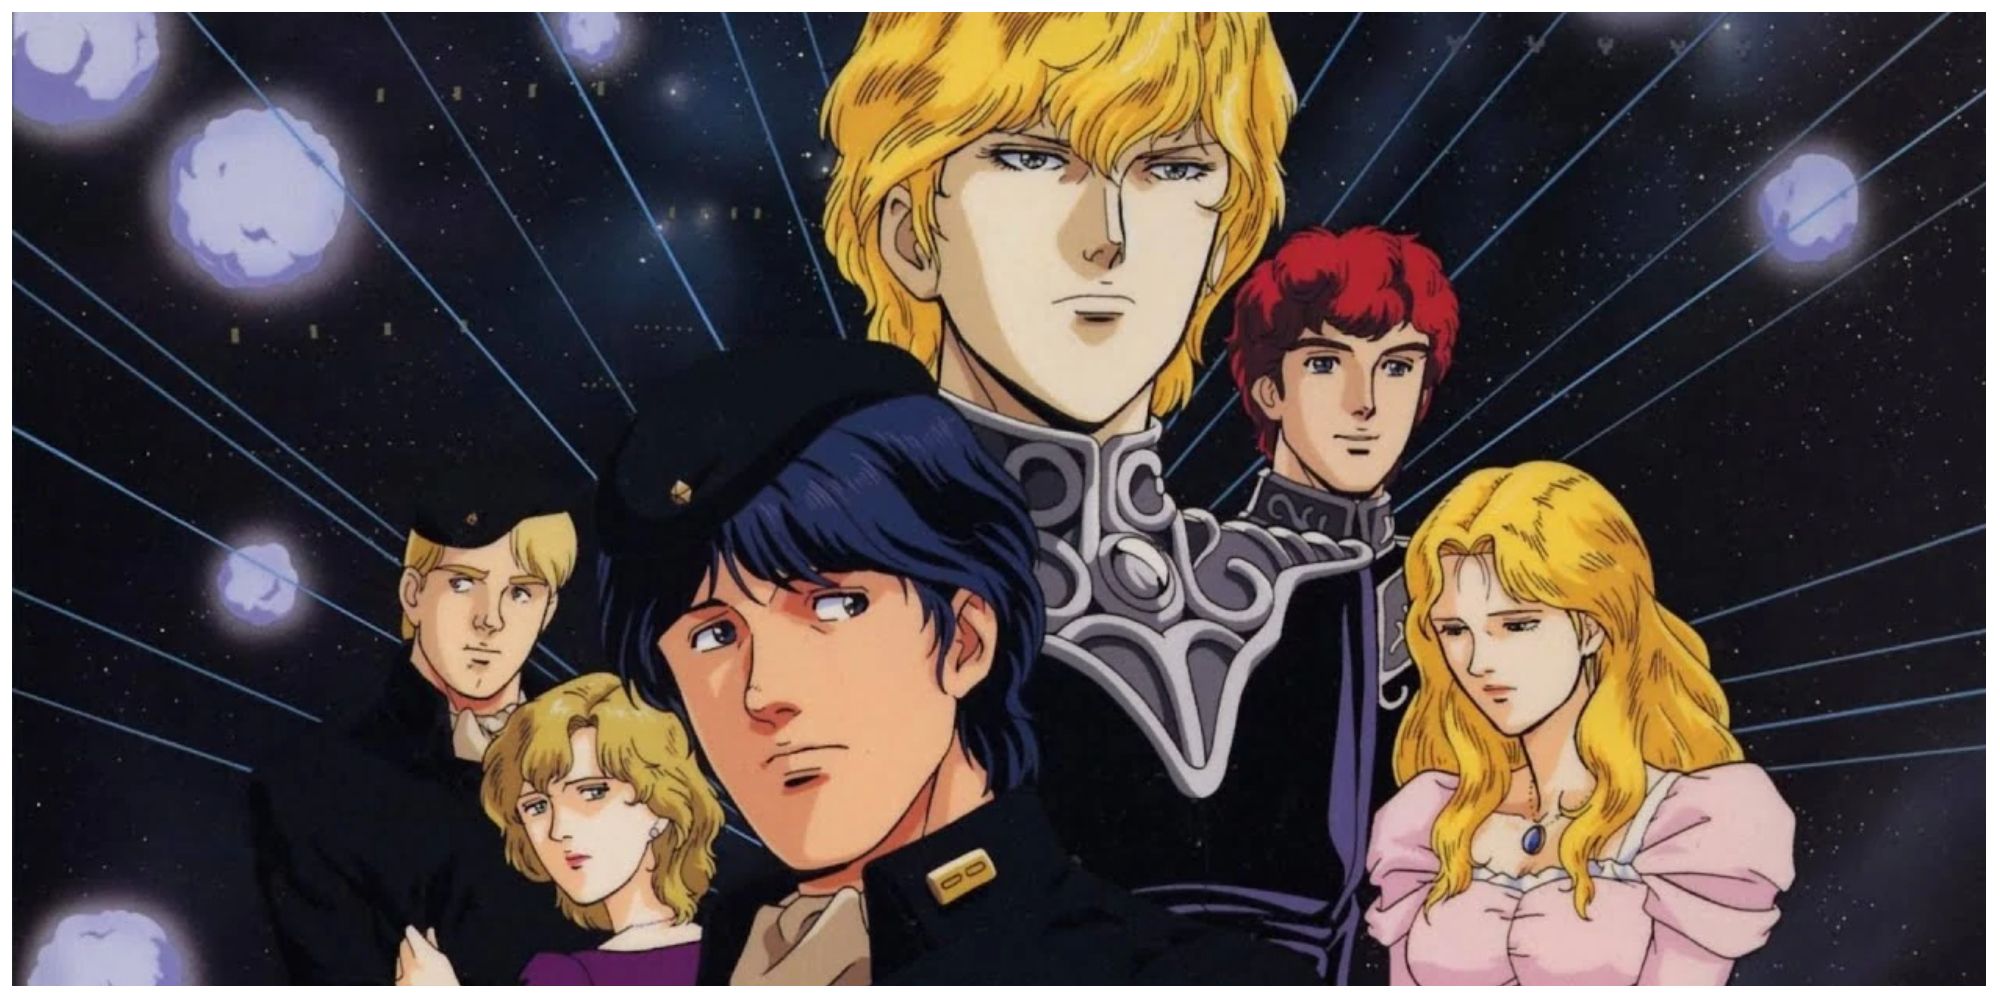 Legend Of The Galactic Heroes main cast.